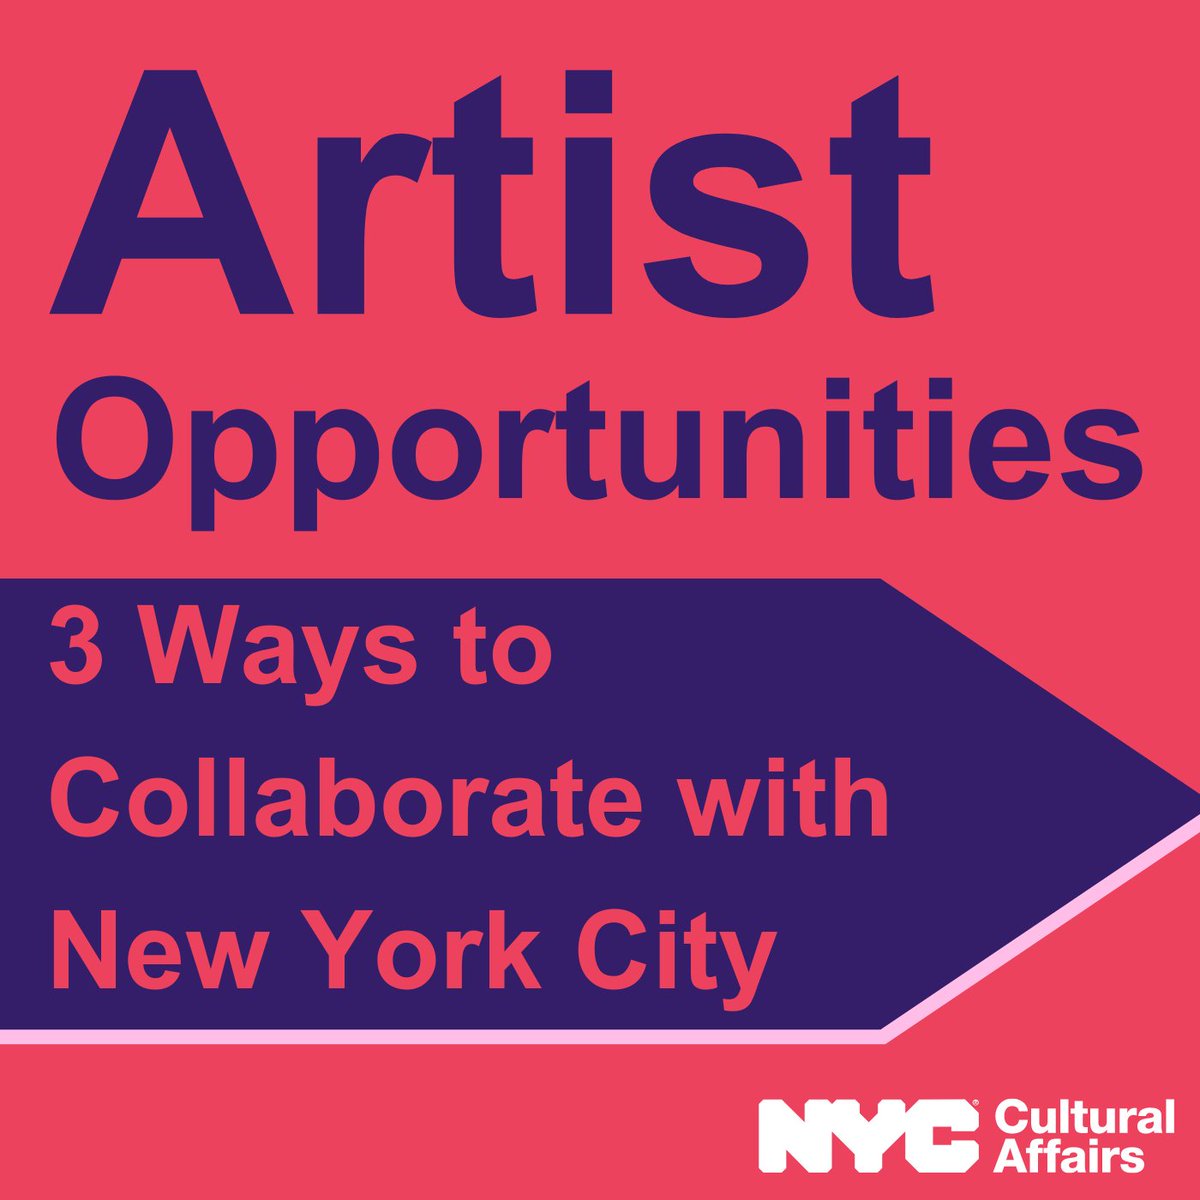 📢 Attention Artists: The City of New York is always looking to collaborate with the incredible artists who live here. There are currently a number of ways that artists can get involved in shaping our public realm and connecting with their fellow residents. ⬇️⬇️⬇️